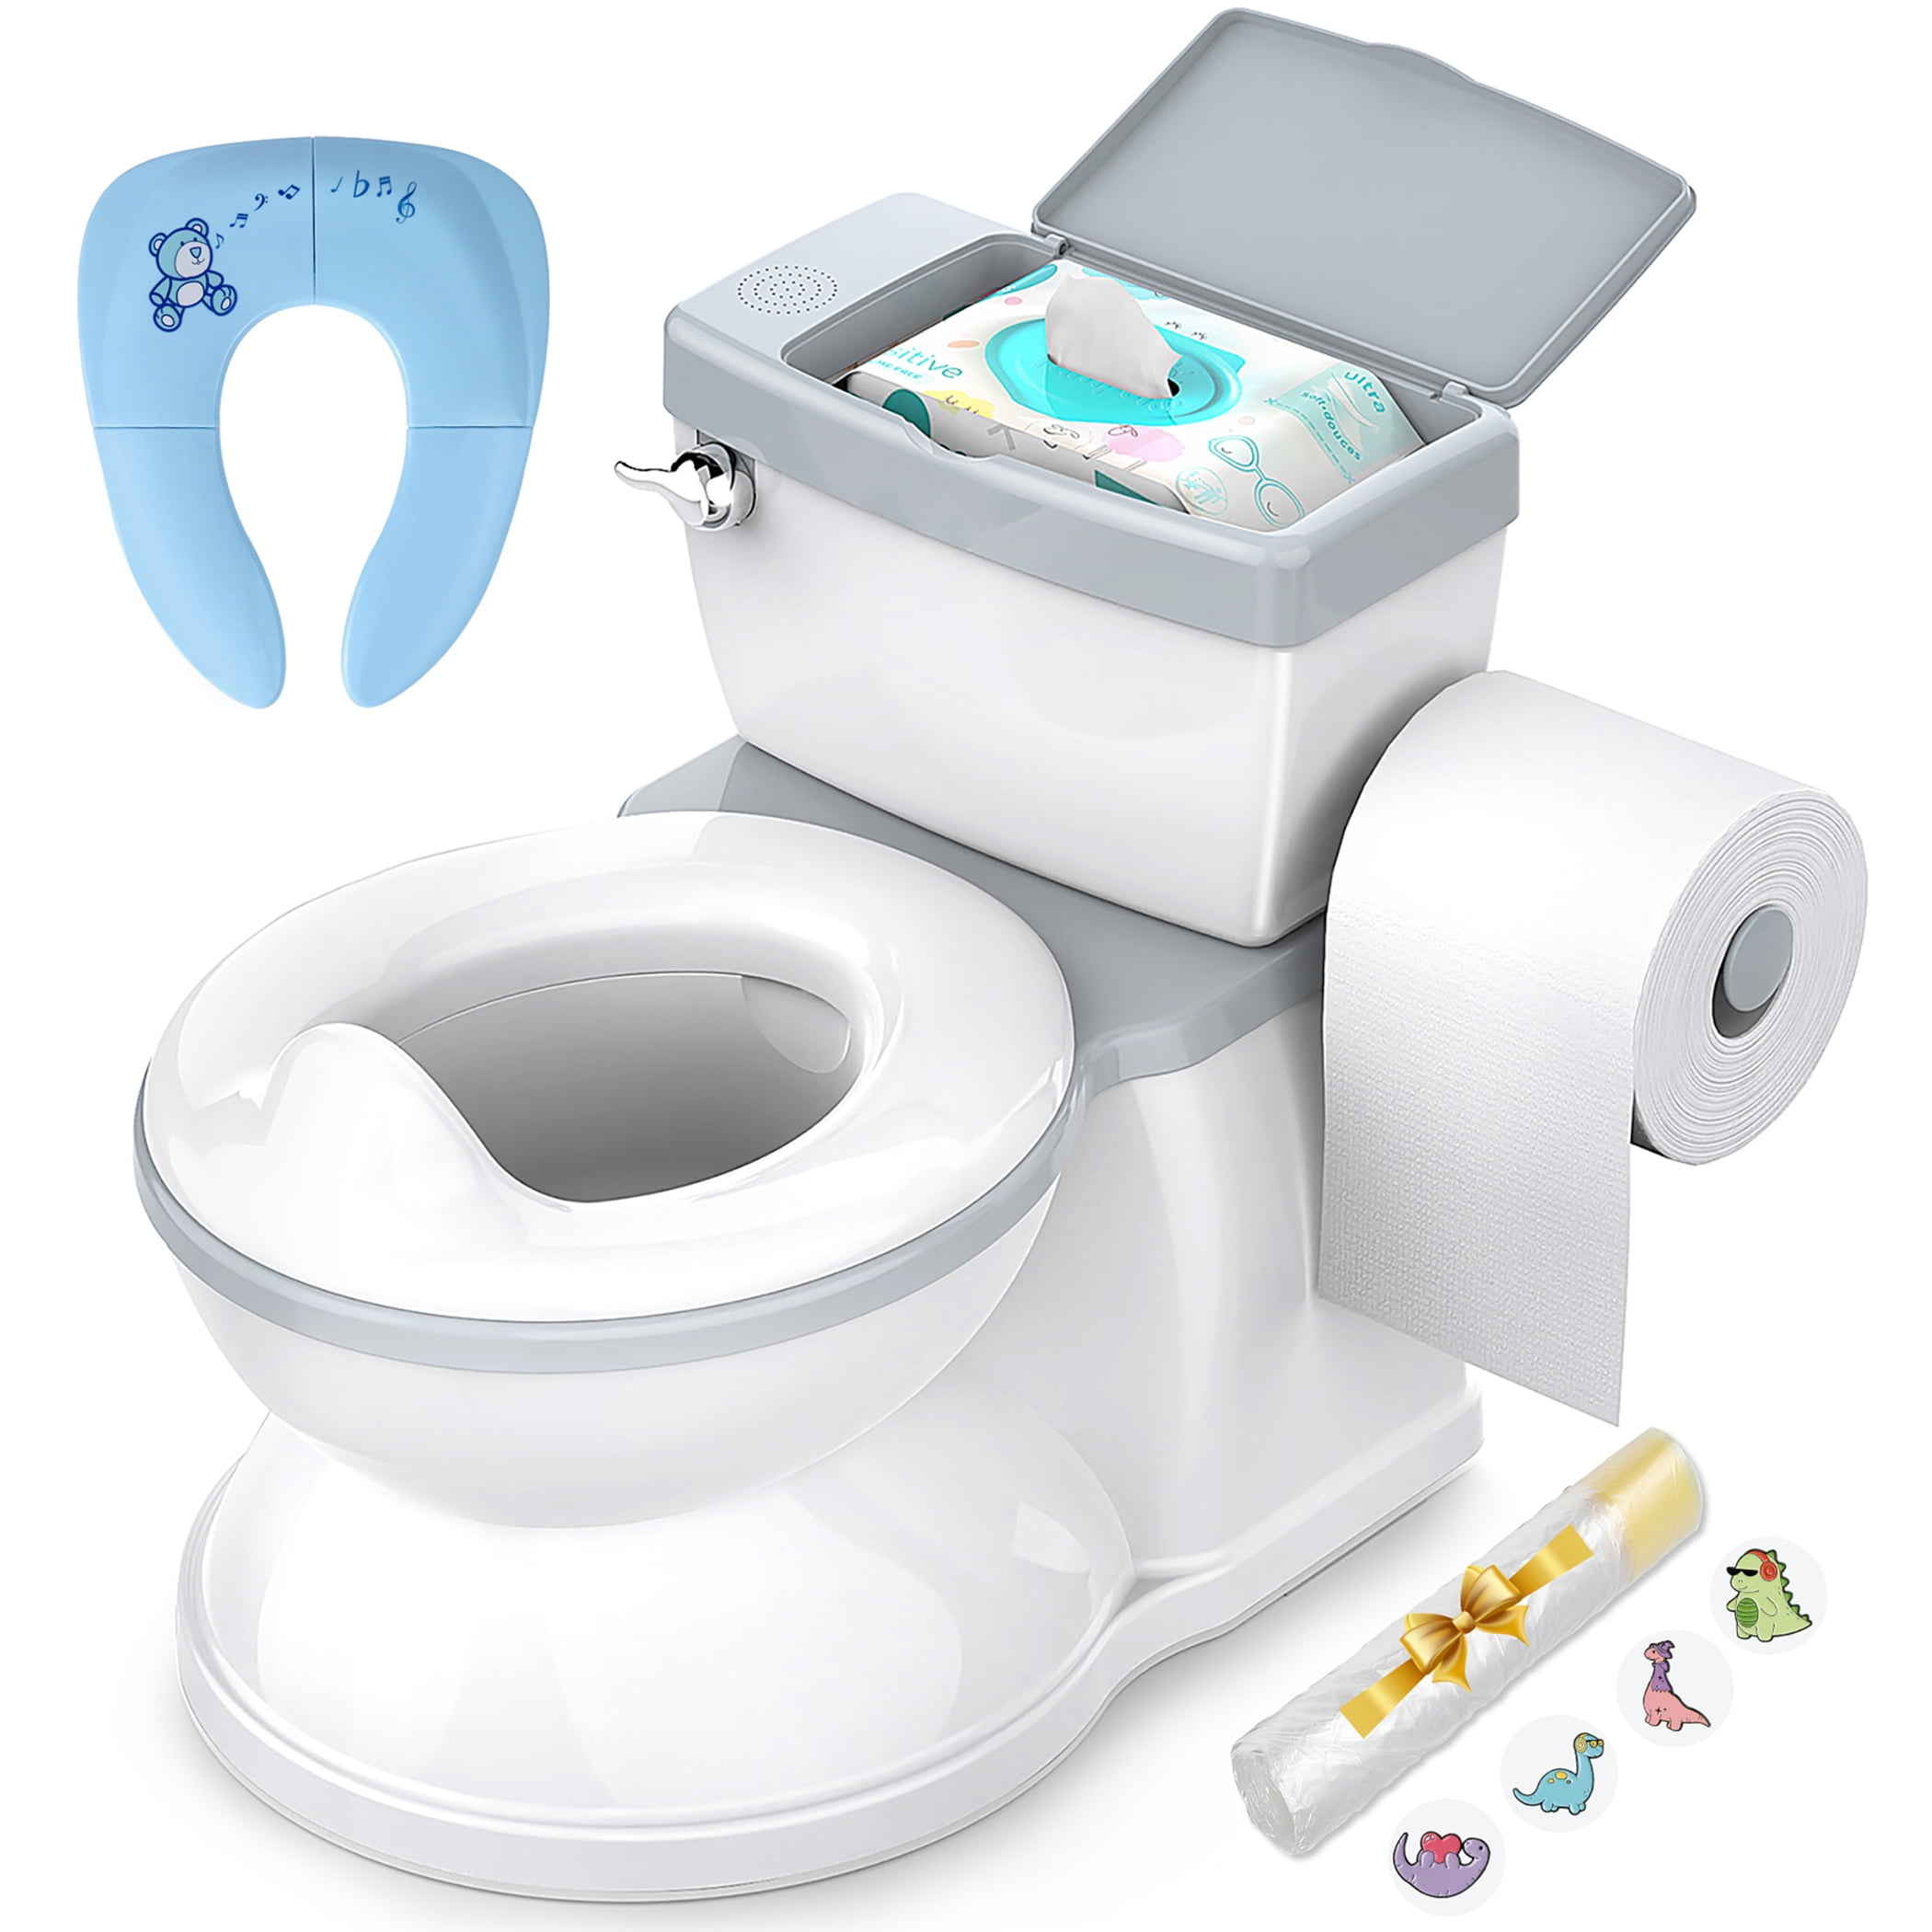 BabyBond Baby Potty Training Toilet with Realistic Flushing Sound & Feel  like an Adult Toilet, Removable Pot, Storage Tank and Toilet Paper Holder  for Aged 1-3(White) 